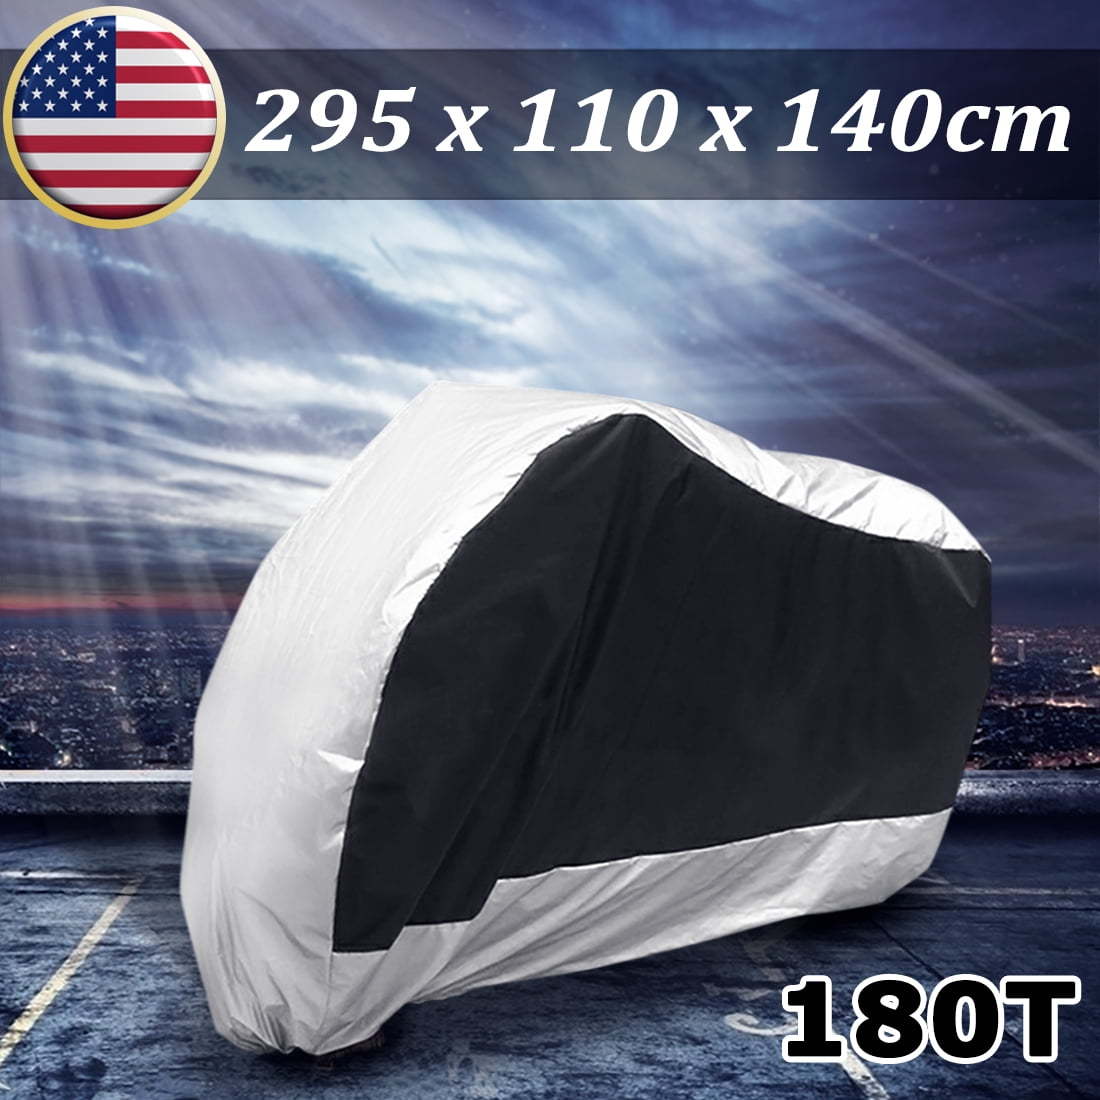 Black Silver SurePromise Motorcycle Motorbike Waterproof Rain UV Protective Breathable Cover Outdoor Indoor 3XL With storage bag 295 x 110 x 140 cm 